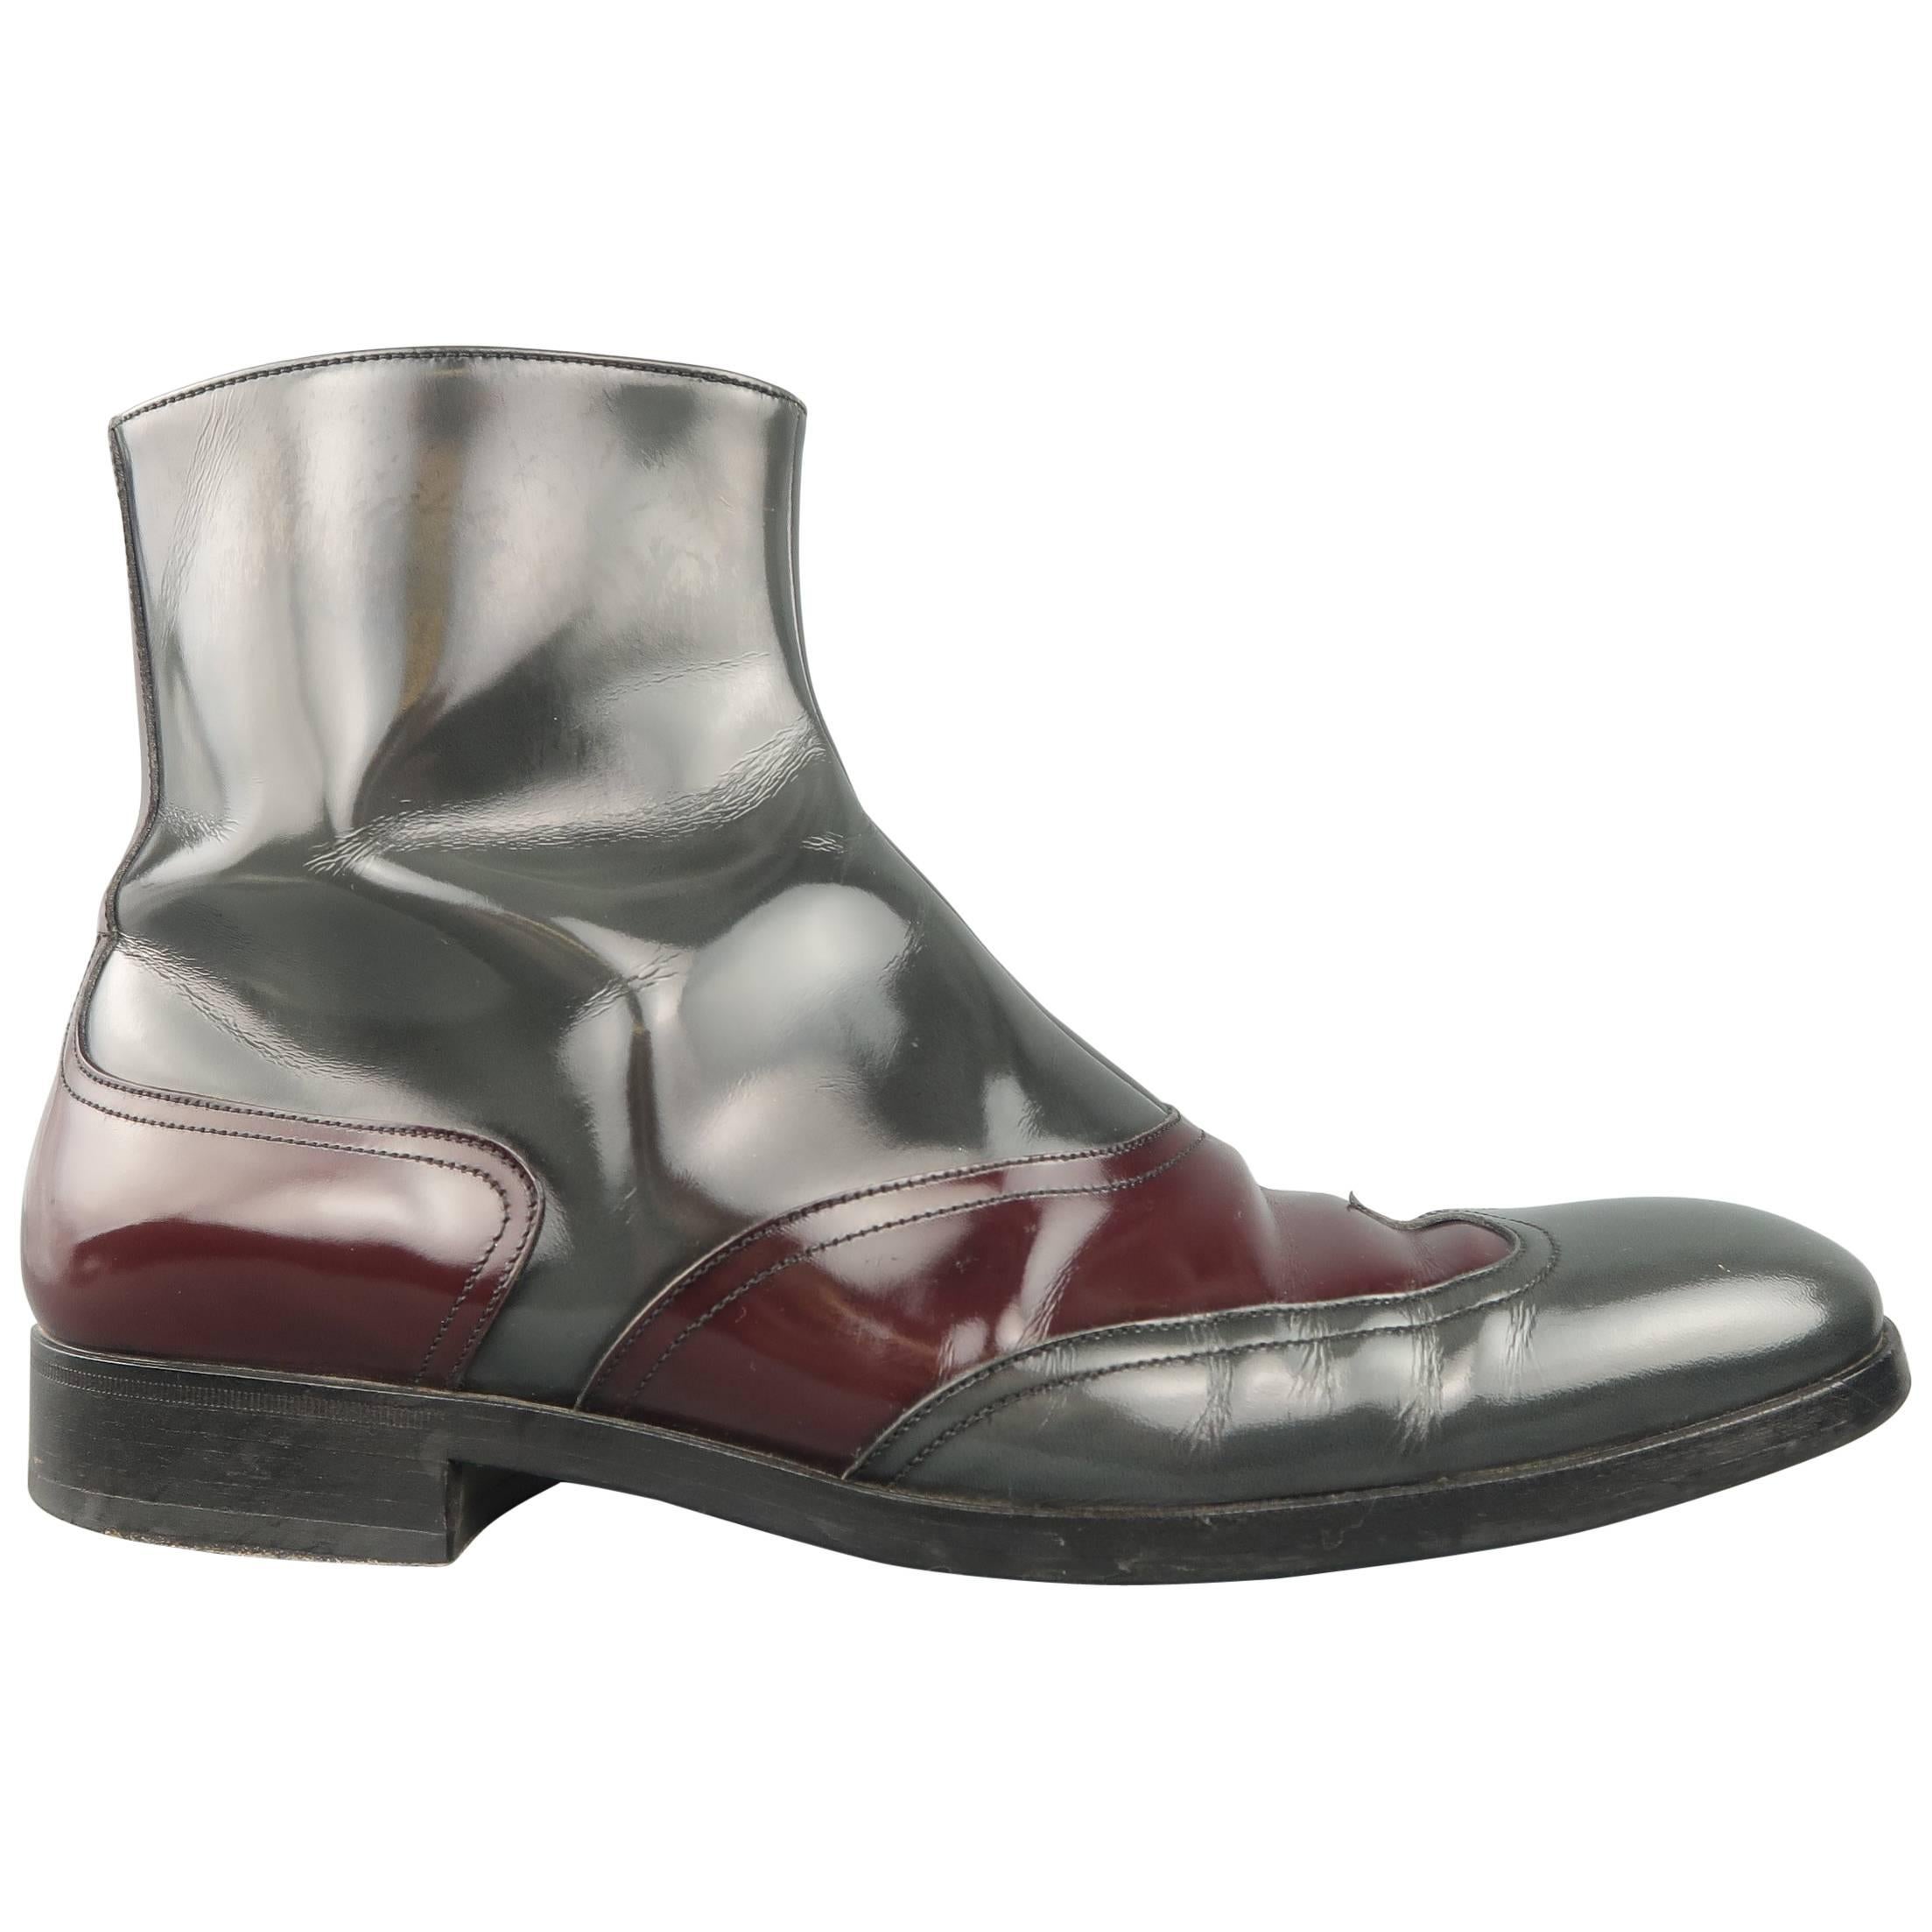 Men's Versace Boots Size 8 Grey & Burgundy Patent Leather Ankle Boots